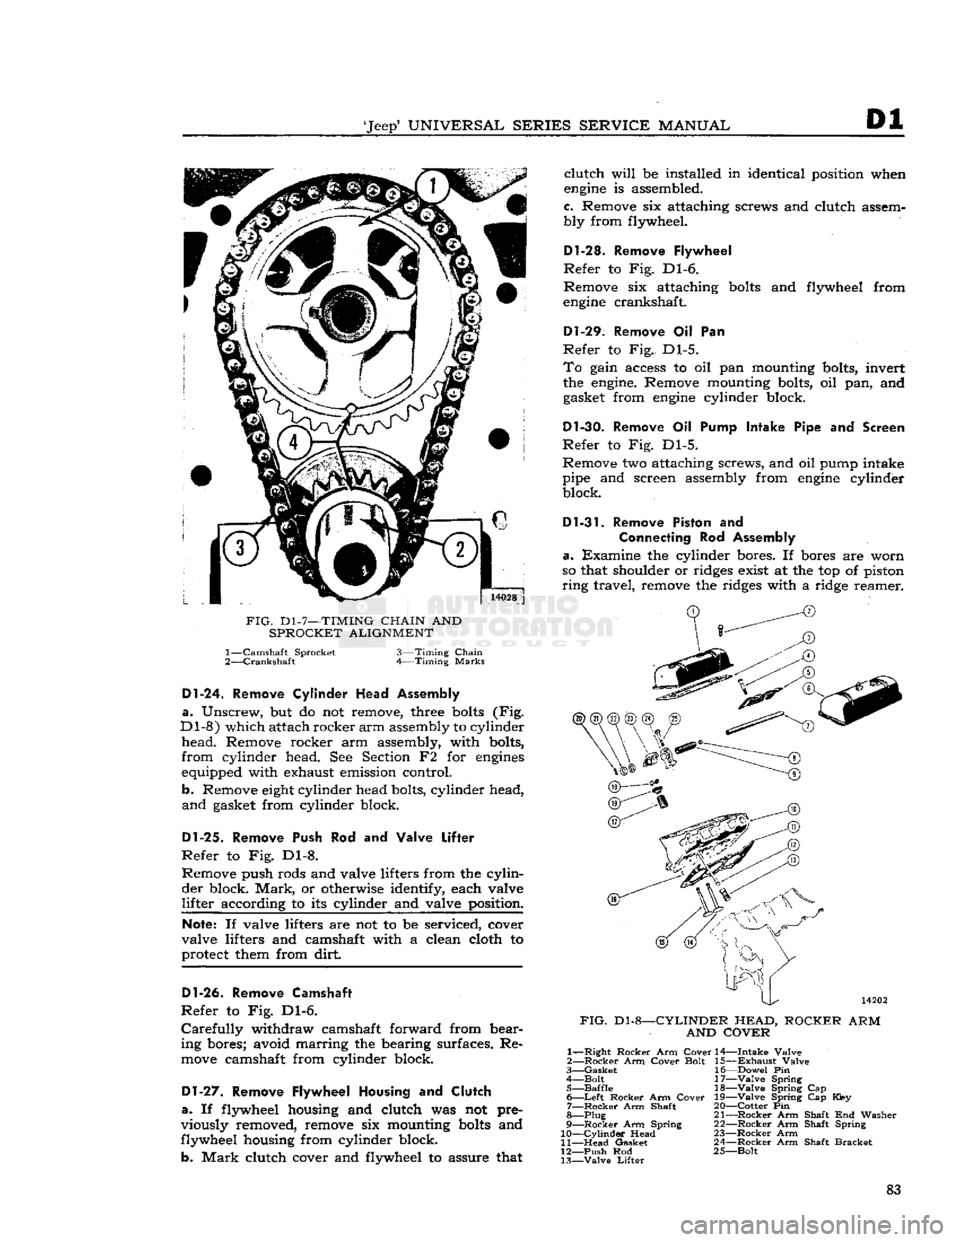 JEEP CJ 1953  Service Manual 
Jeep
 UNIVERSAL
 SERIES SERVICE
 MANUAL 

Dl 

14028
 j 

FIG.
 D1-7—TIMING
 CHAIN
 AND 
 SPROCKET ALIGNMENT  1—
 Camshaft Sprocket 

2—
 Crankshaft 
 3—Timing
 Chain 

Timing
 Marks 
 Dl-2